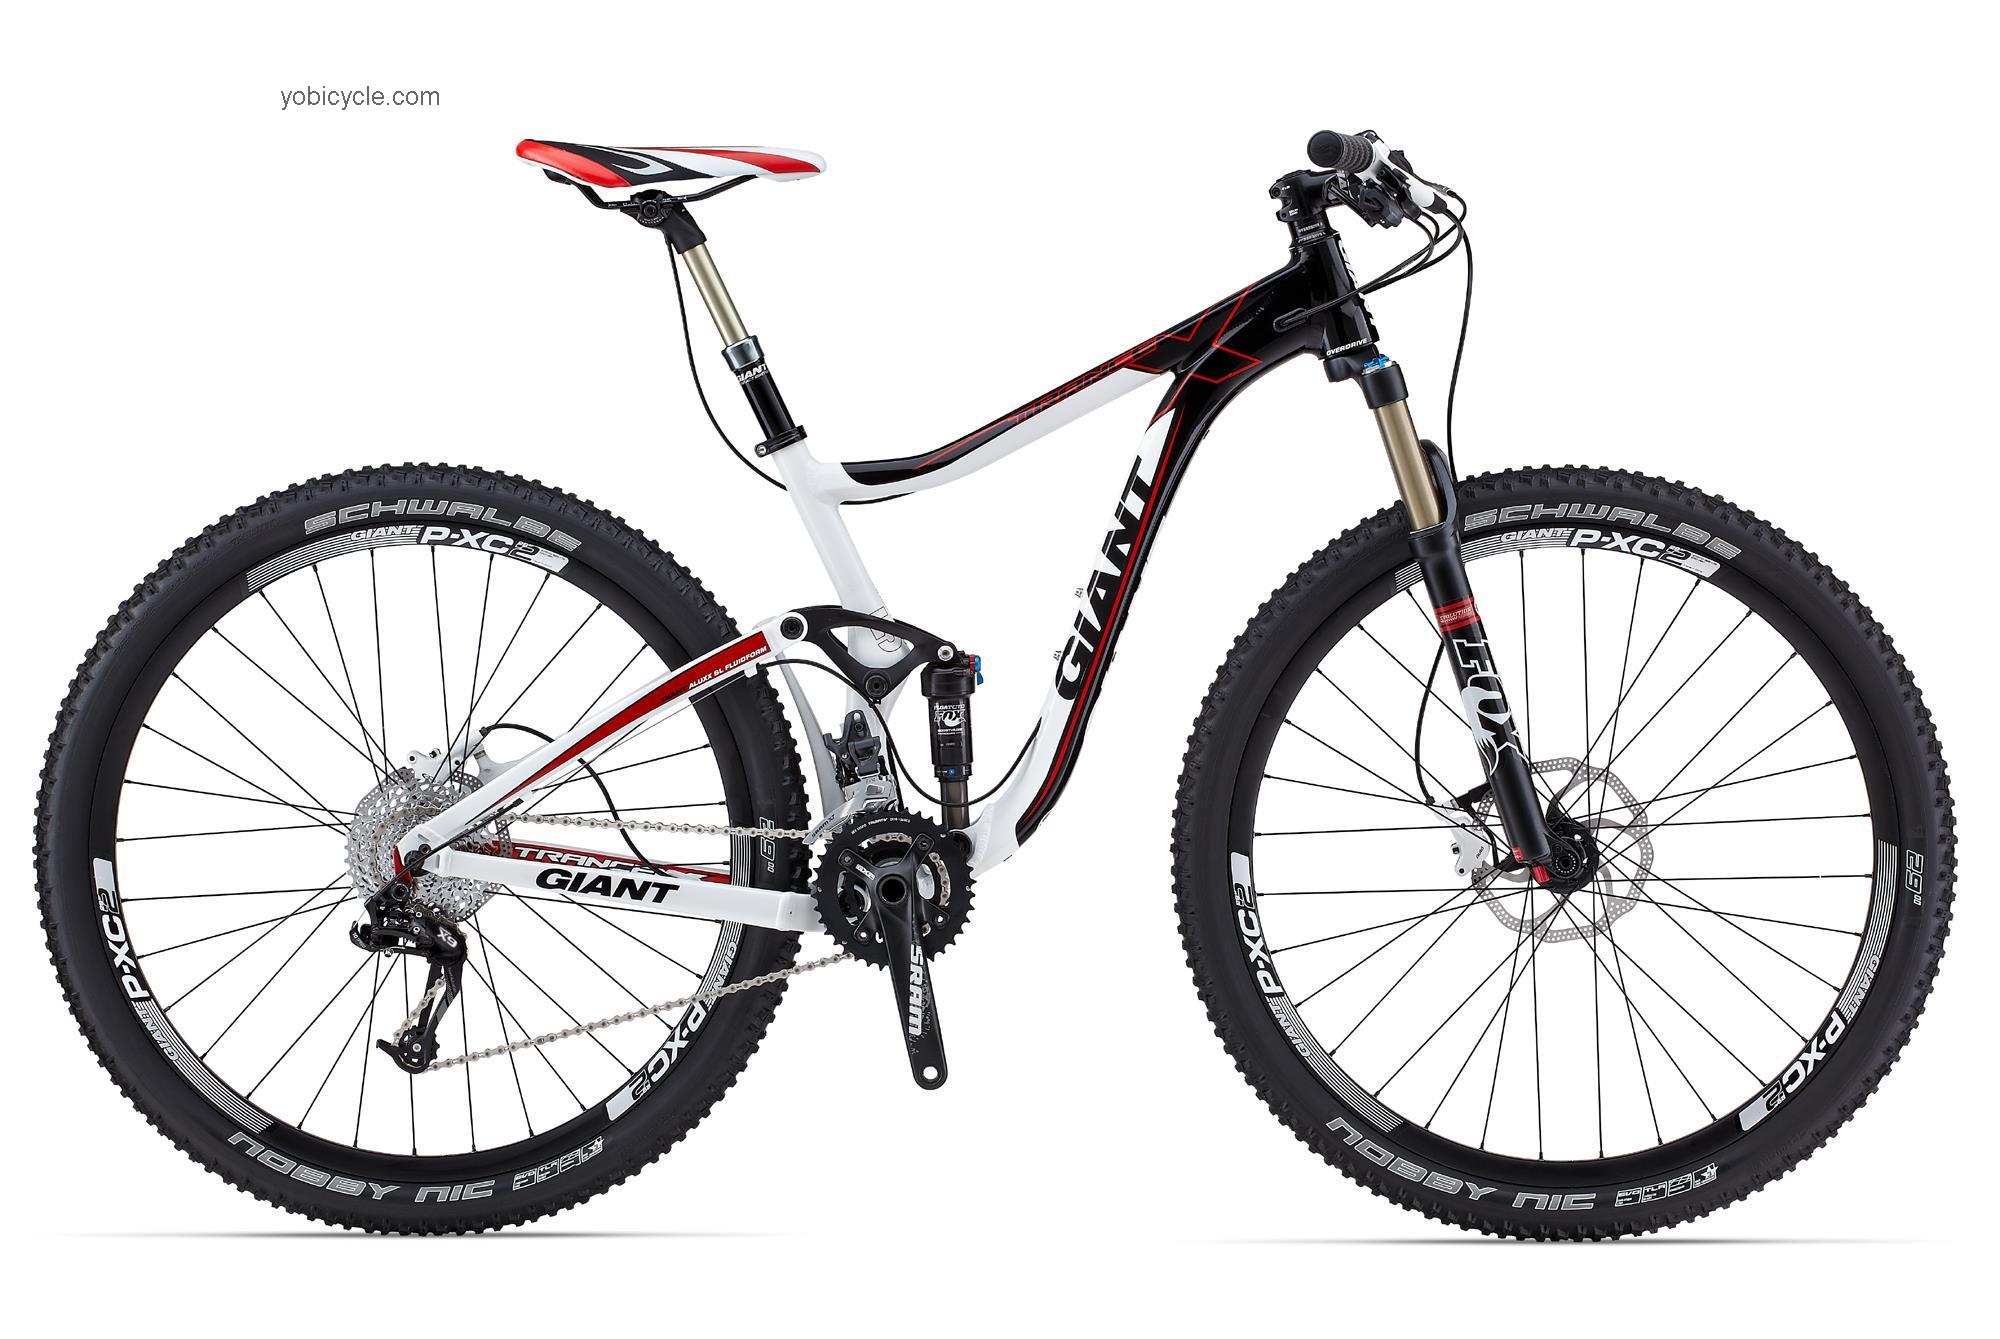 Giant Trance X 29er 1 competitors and comparison tool online specs and performance